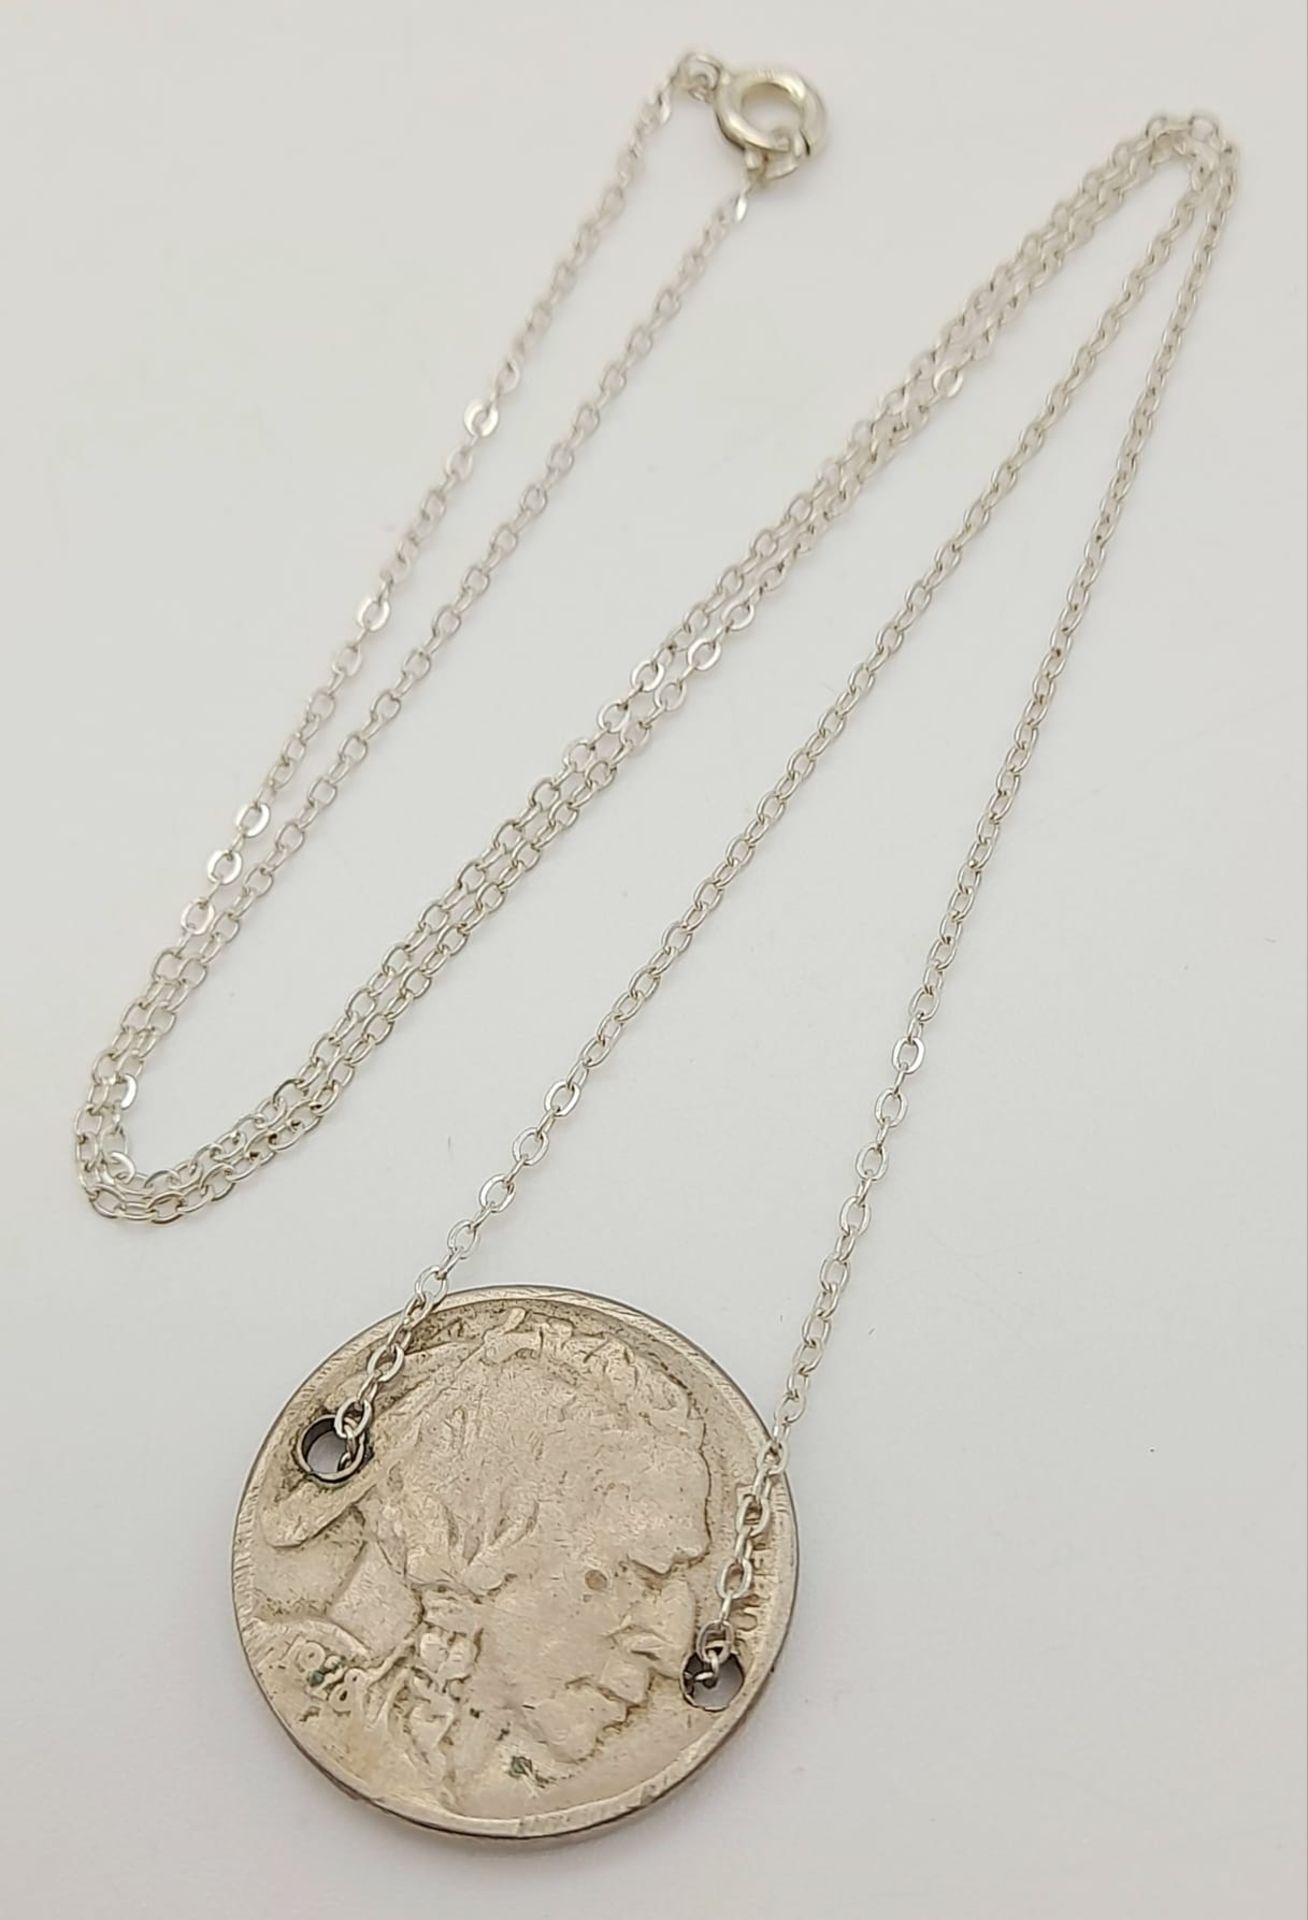 A Vintage 1928 Indian Buffalo Head US 5 Cent Coin Necklace on 46cm Sterling Silver Chain